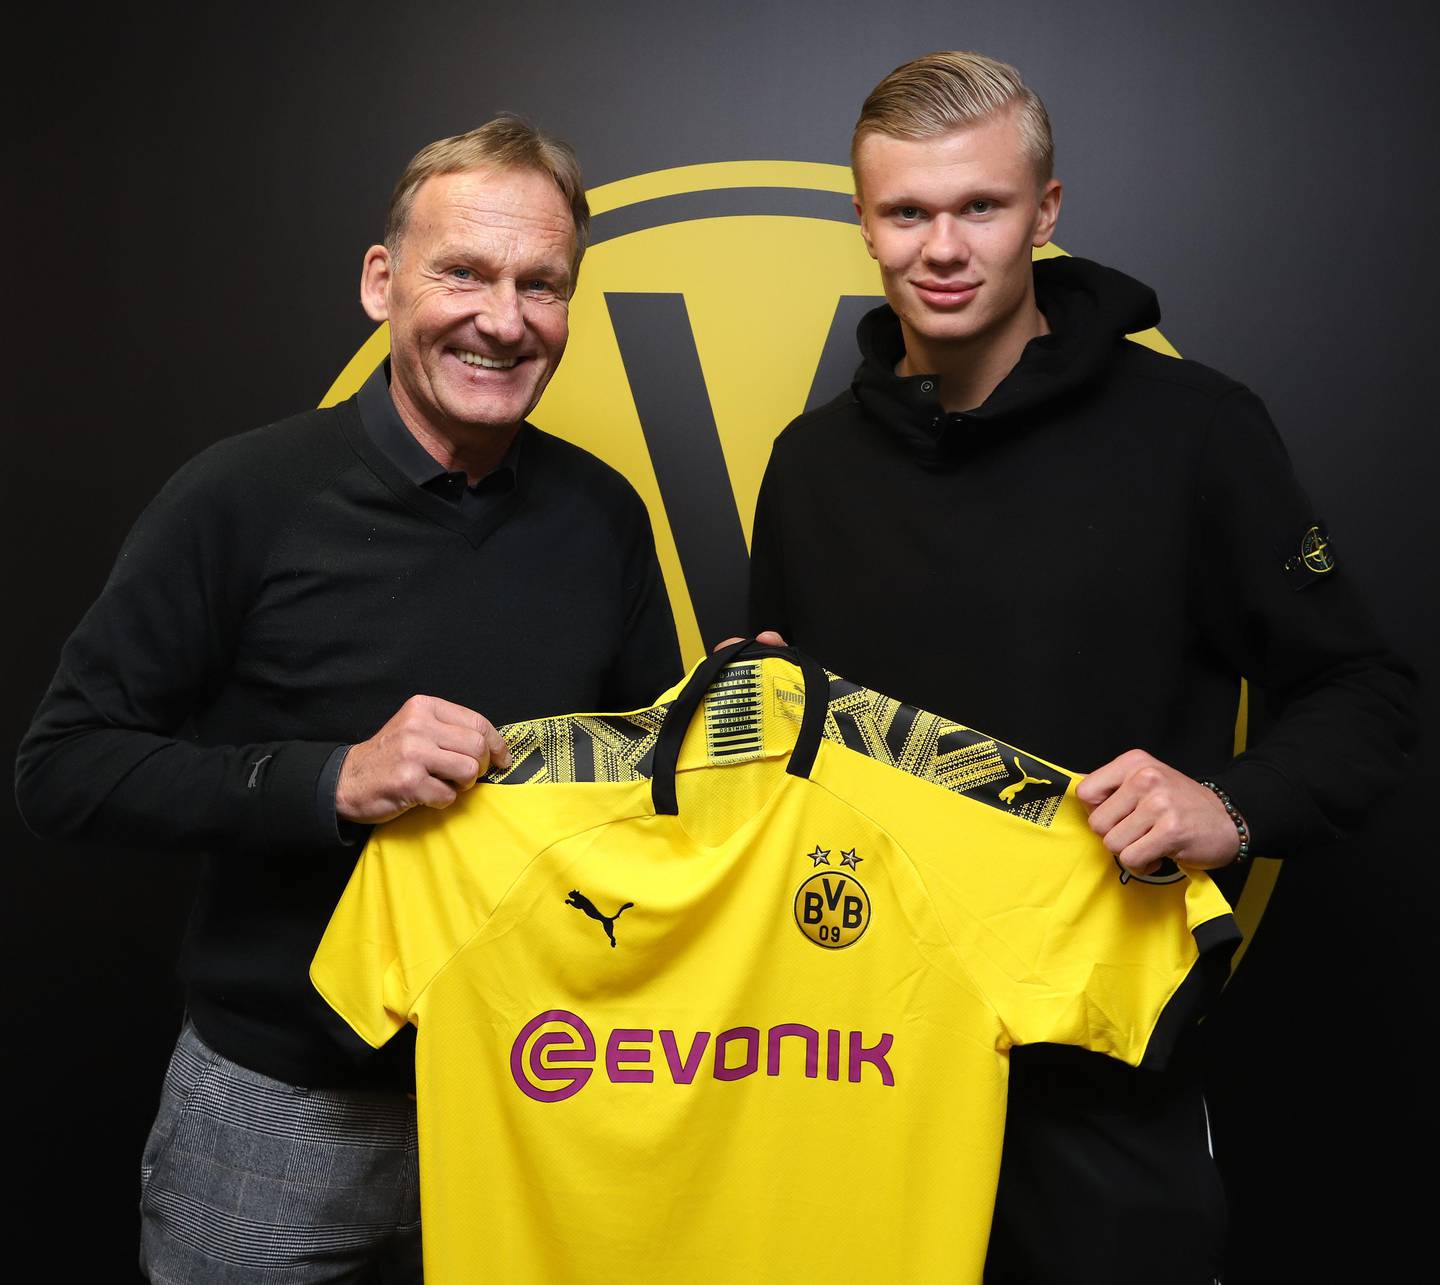 Hans-Joachim Watzke (L), CEO of German first division Bundesliga football club Borussia Dortmund, poses with the club's new recruit, Norwegian forward Erling Braut Haaland, holding his new jersey on December 29, 2019 in Dortmund, western Germany. - Borussia Dortmund announced that Haaland has signed a contract with them until June 2024. (Photo by Joel KUNZ / Borussia Dortmund / AFP) / RESTRICTED TO EDITORIAL USE - MANDATORY CREDIT "AFP PHOTO / Borussia Dortmund / Joel KUNZ" - NO MARKETING NO ADVERTISING CAMPAIGNS - DISTRIBUTED AS A SERVICE TO CLIENTS